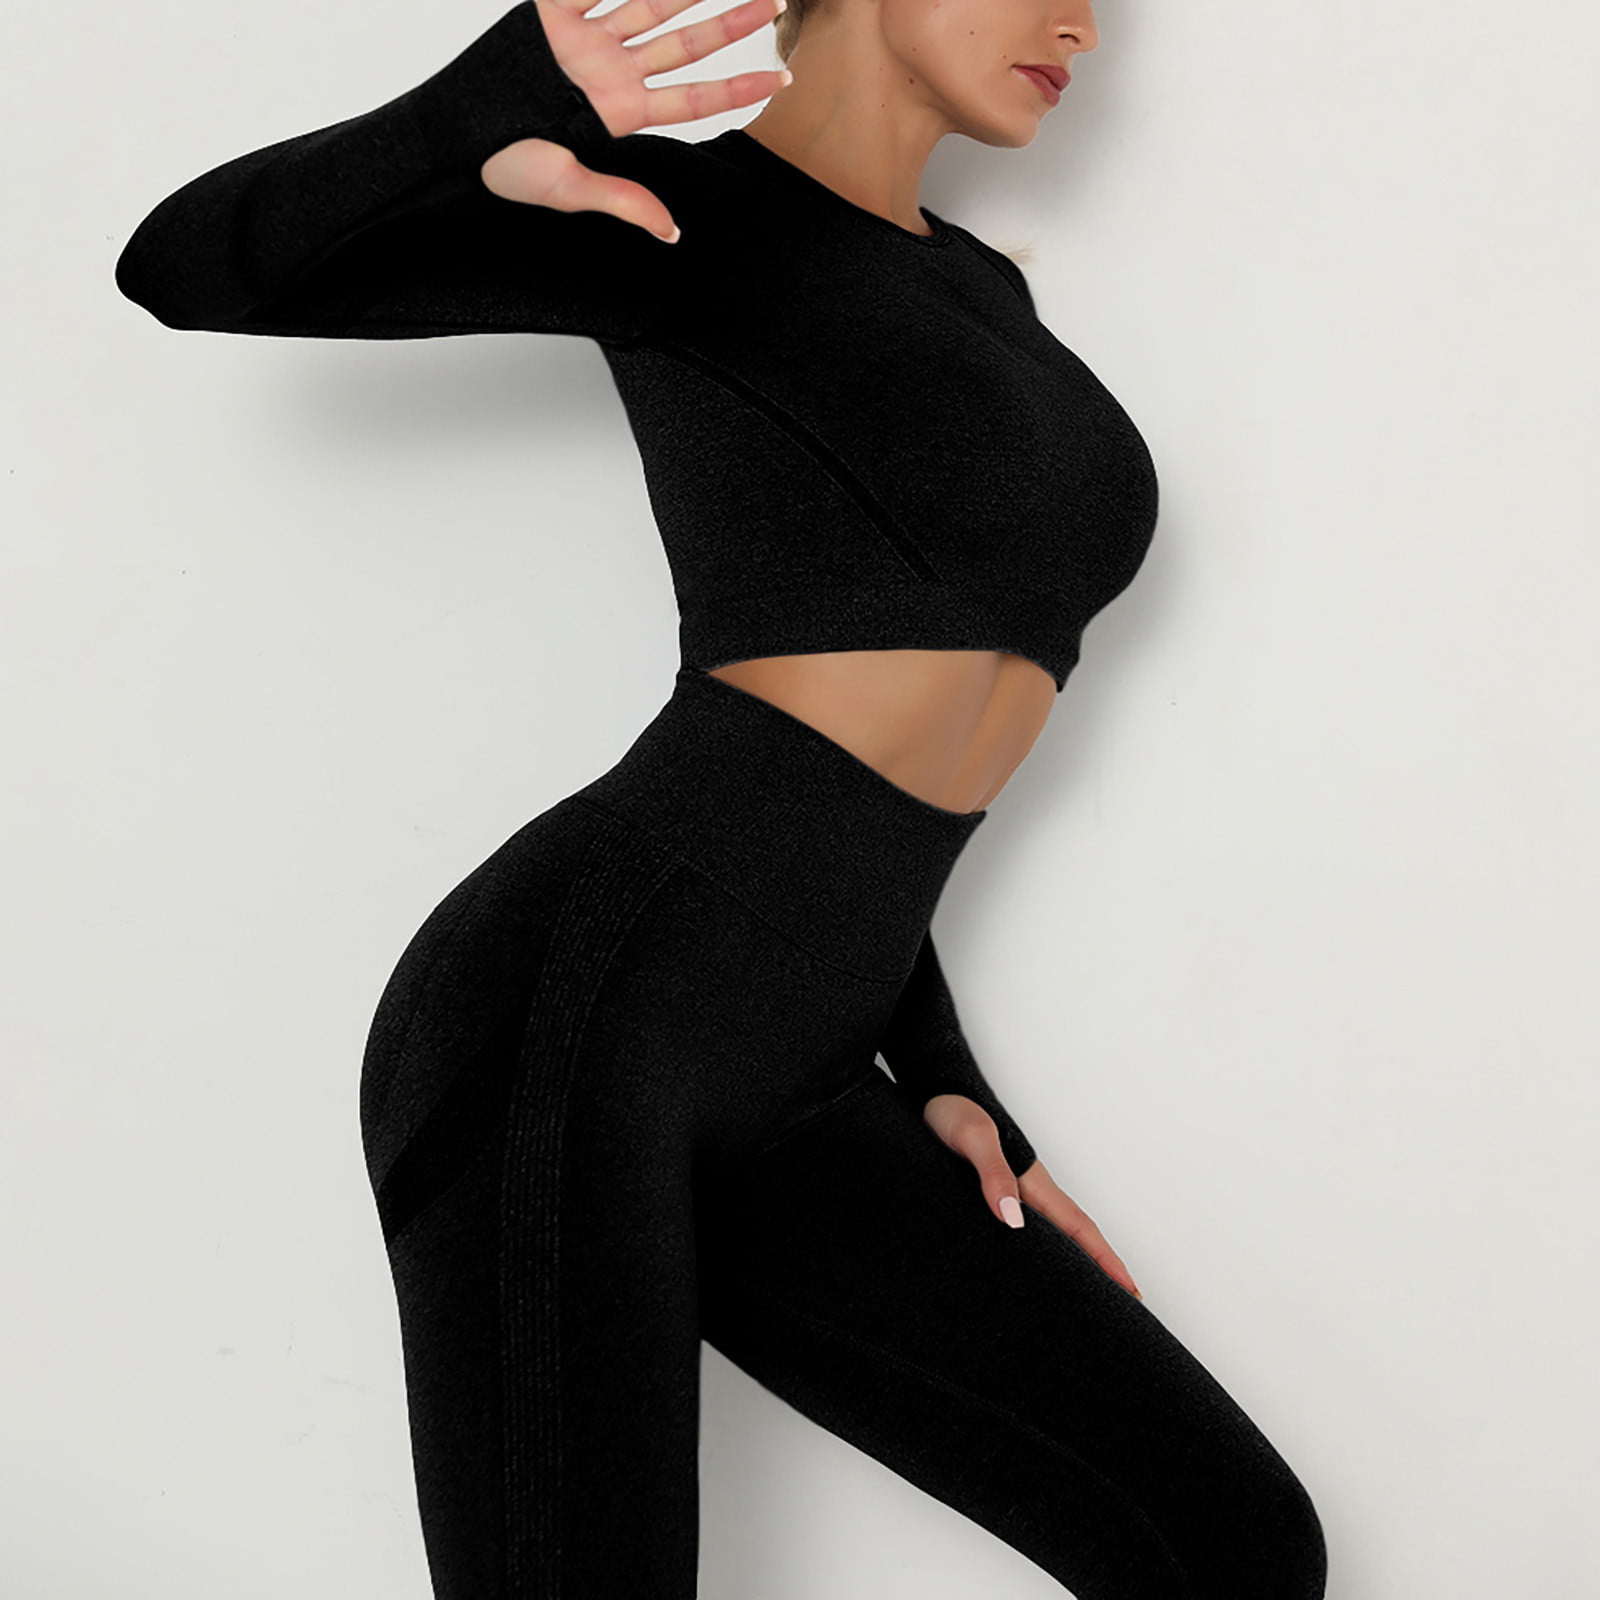  Kaerm Women's Gradient Gym Yoga Workout Sports Outfits Crop Top  with Shaping Leggings Set Tracksuit Black XL : Clothing, Shoes & Jewelry